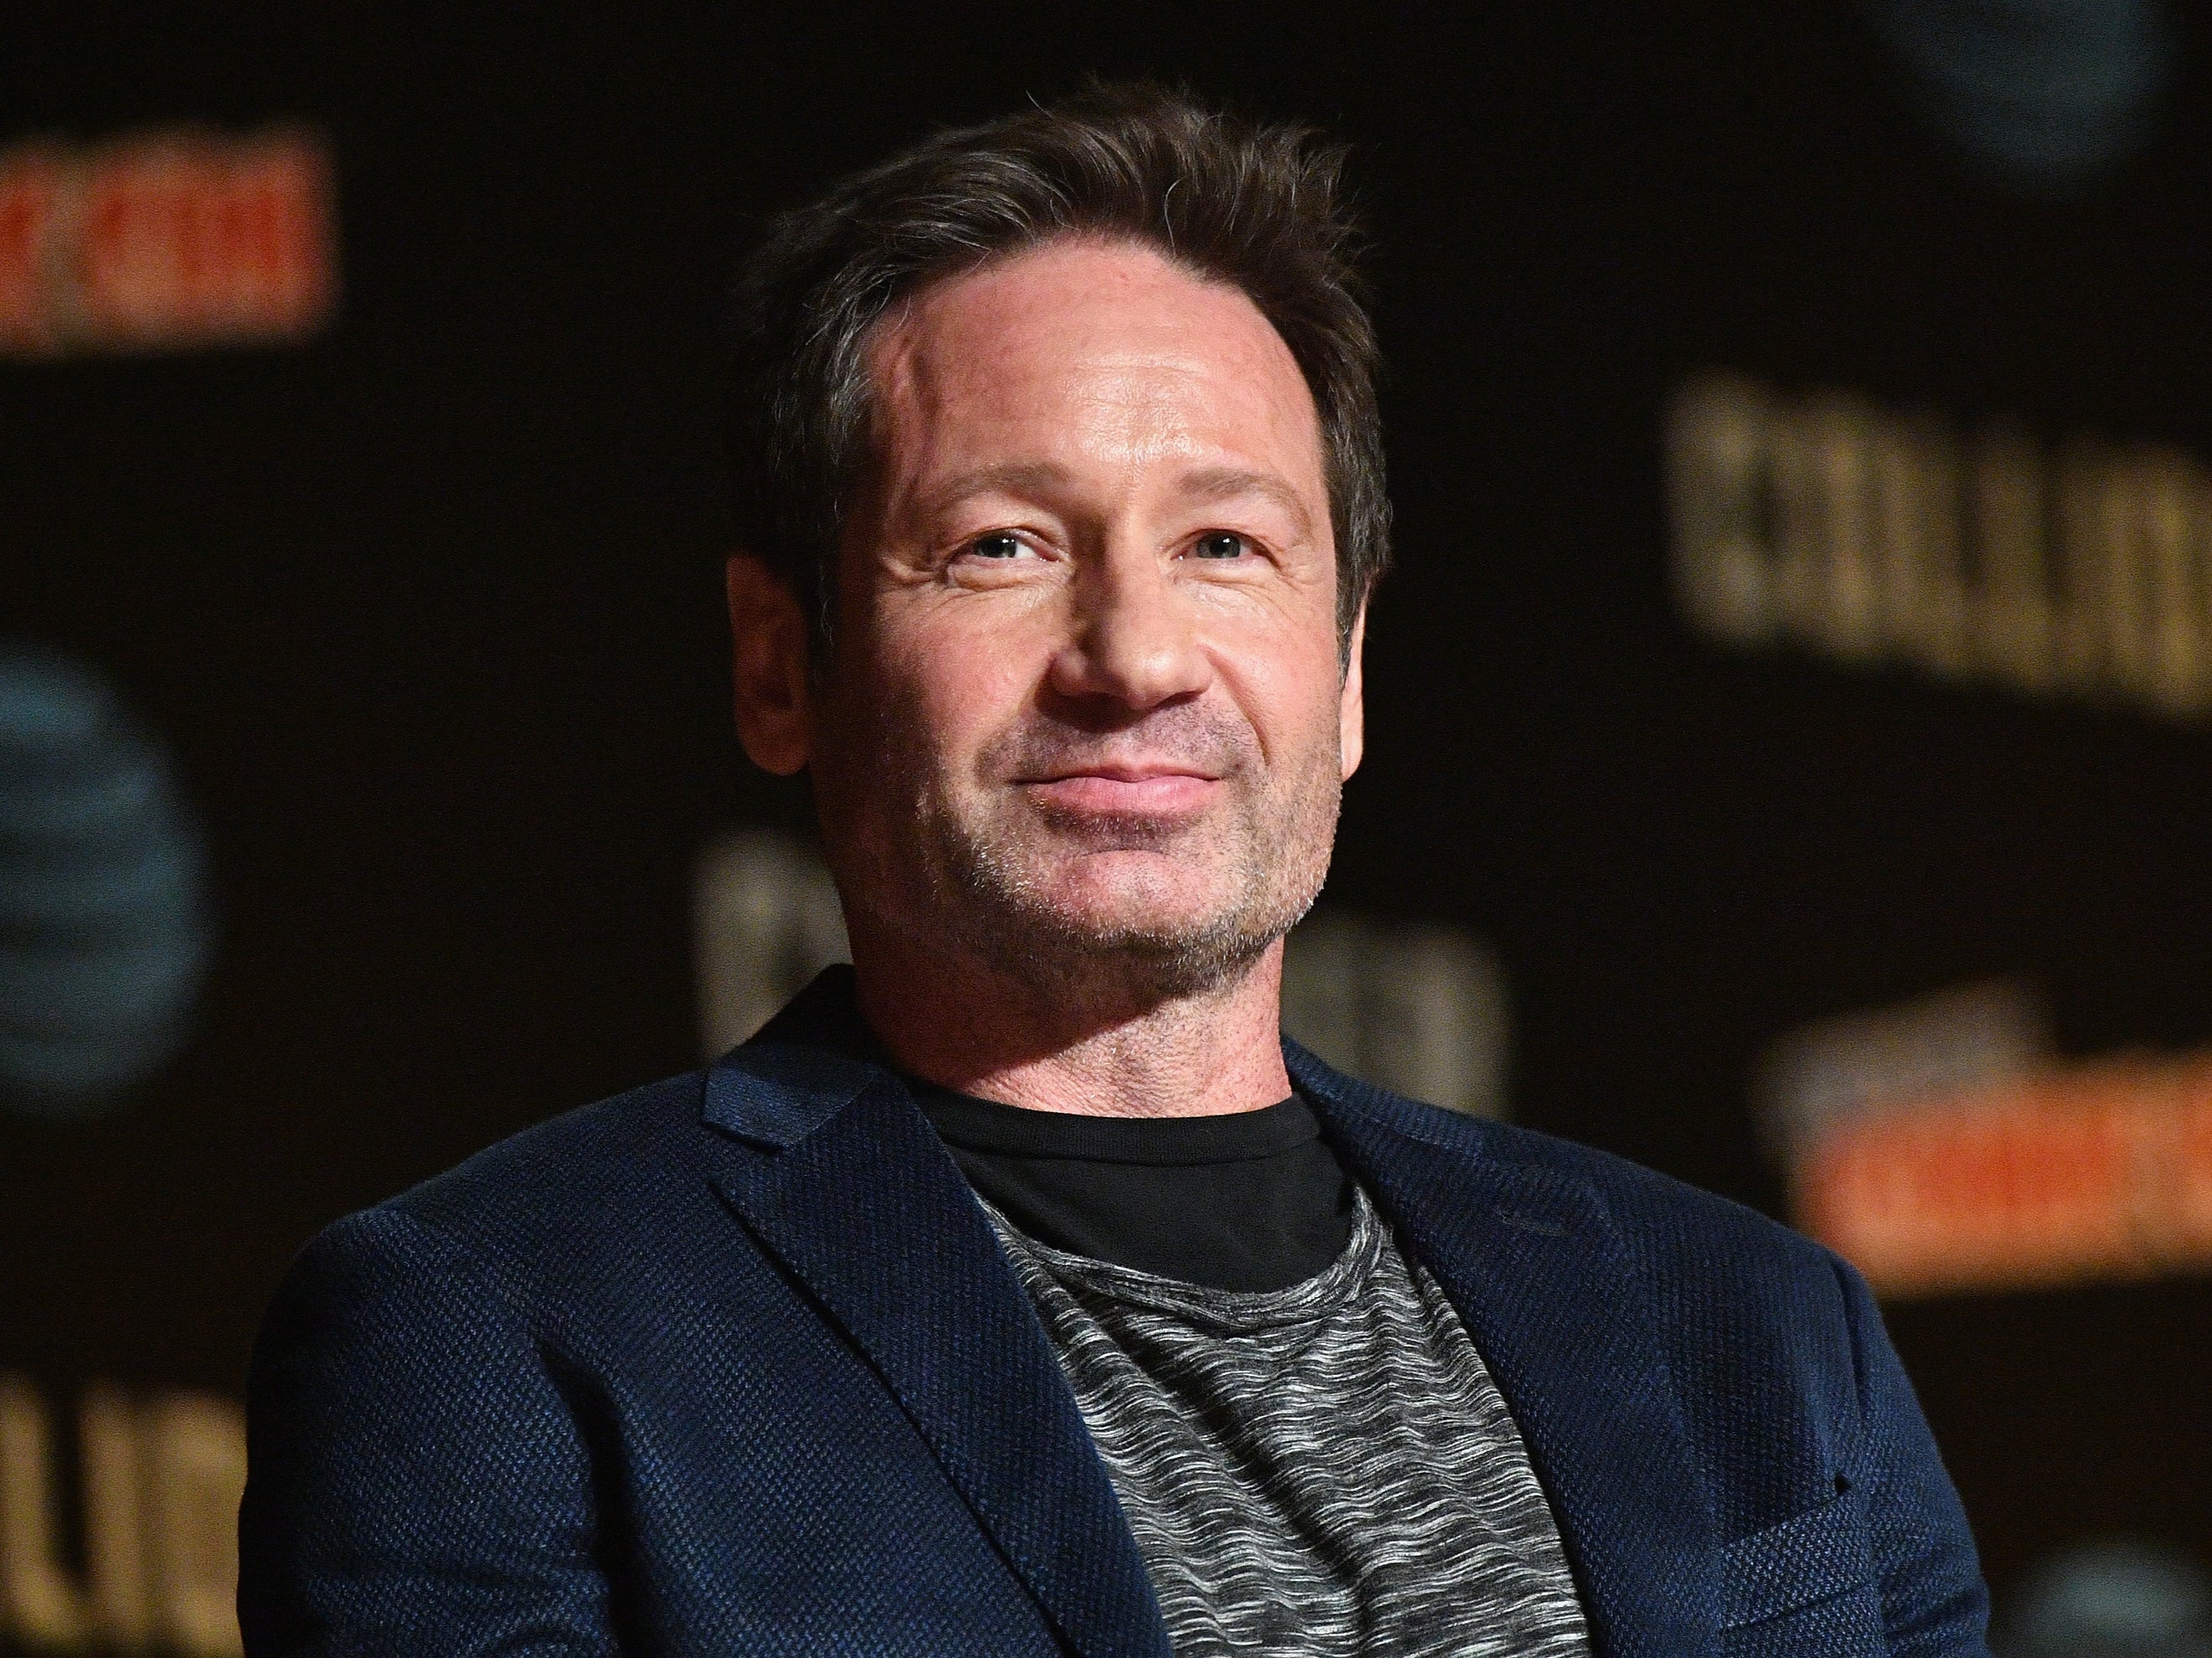 David Duchovny speaks during an X-Files panel during the New York Comic Con on 8 October 2017 in New York City